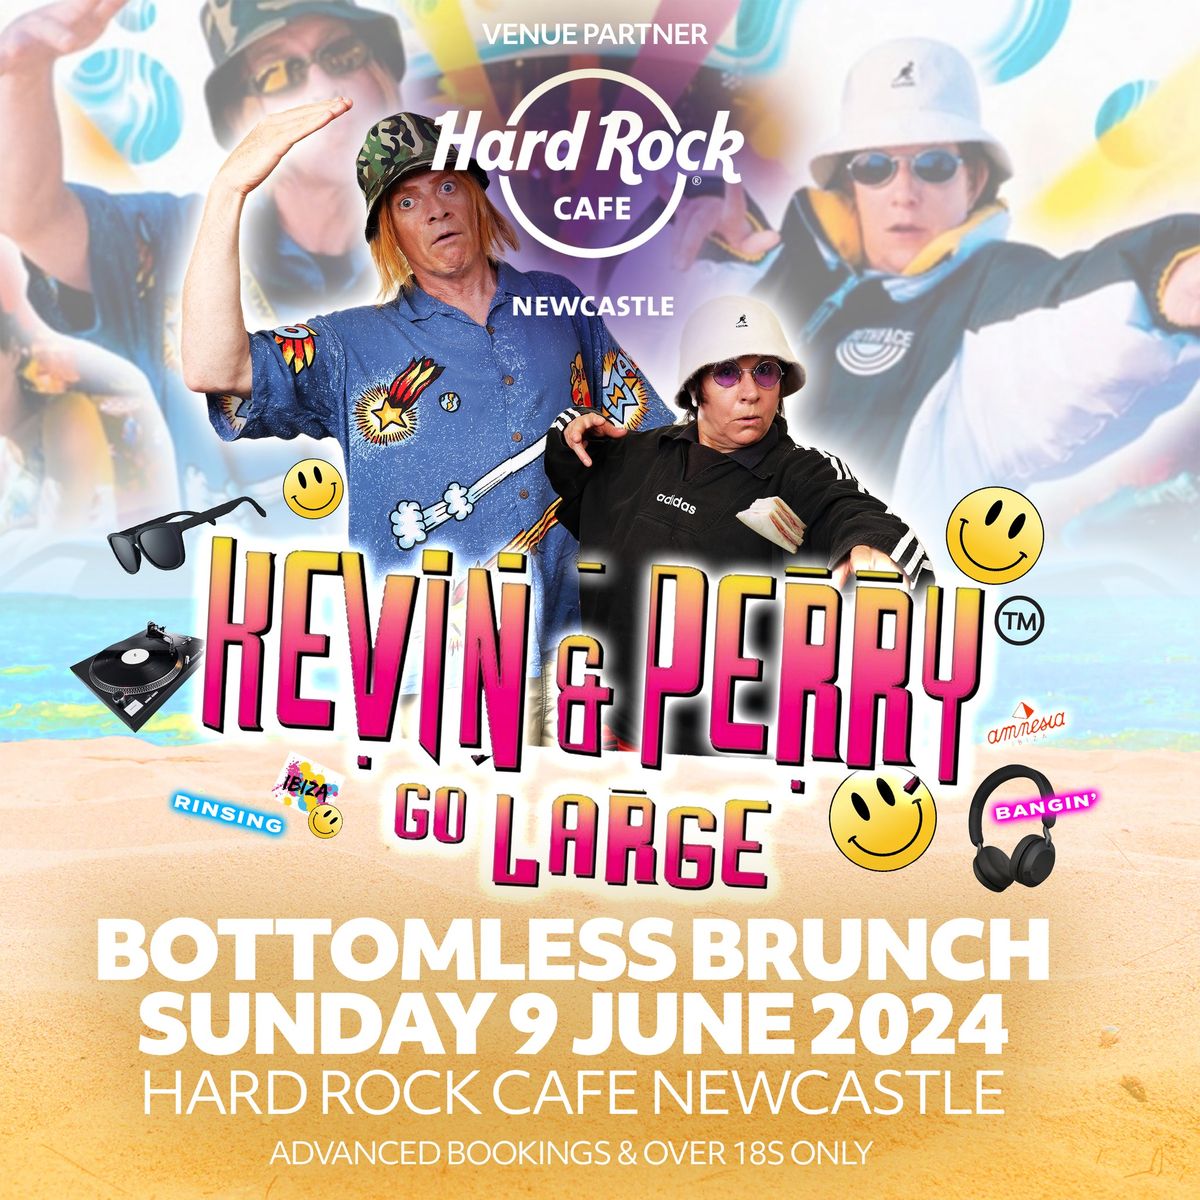 Kevin & Perry Bottomless Brunch 2.0